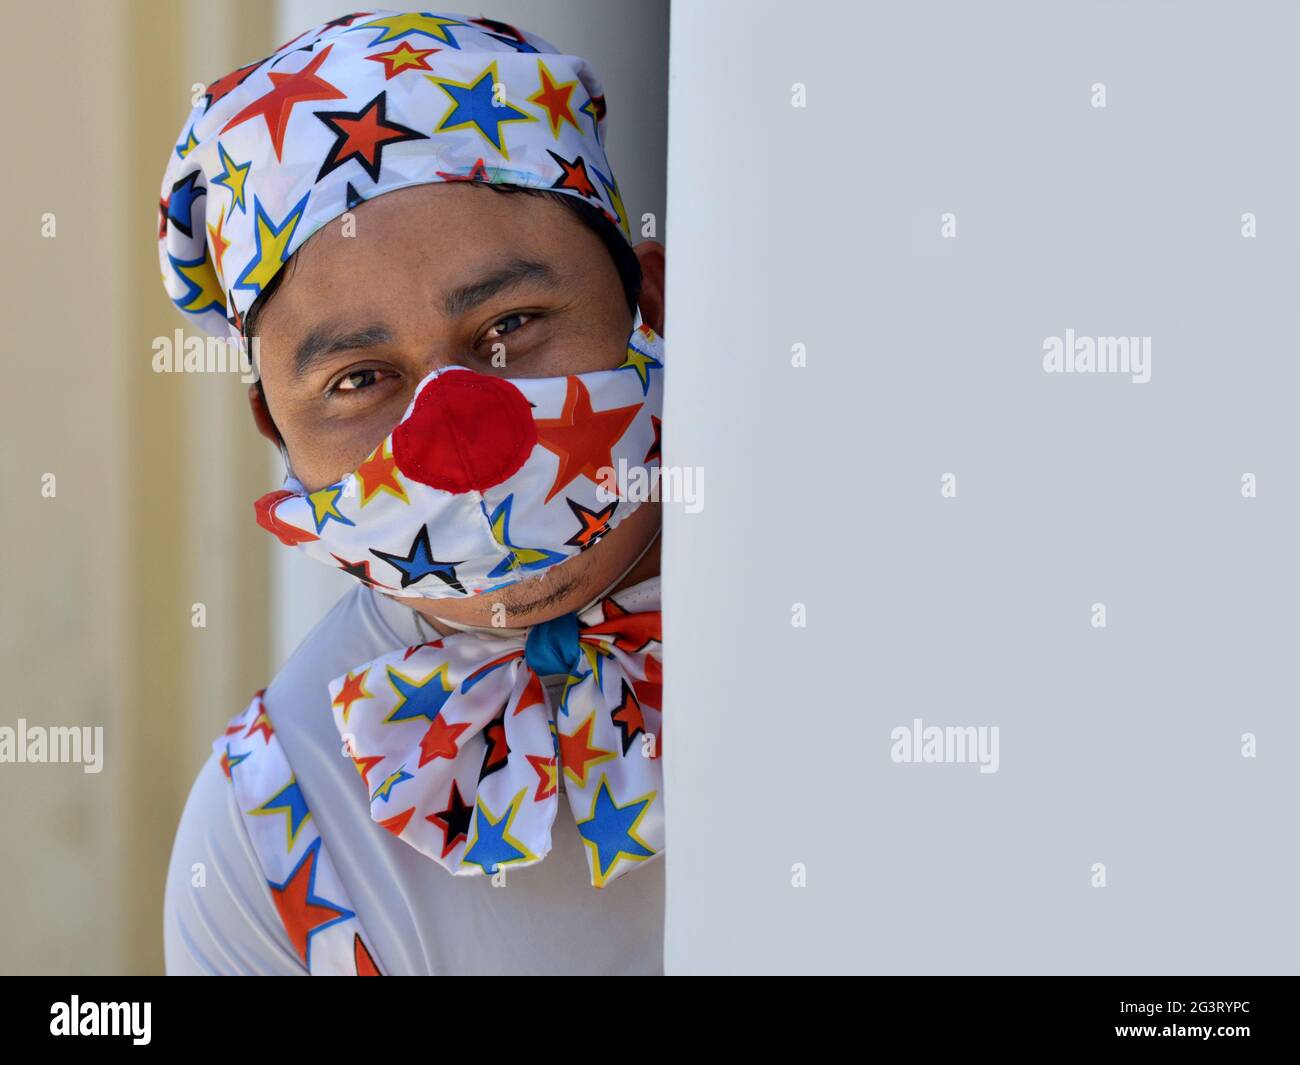 Funny male clown wears star pattern clown outfit and star pattern fabric face mask and peeks around a corner during the global coronavirus pandemic. Stock Photo